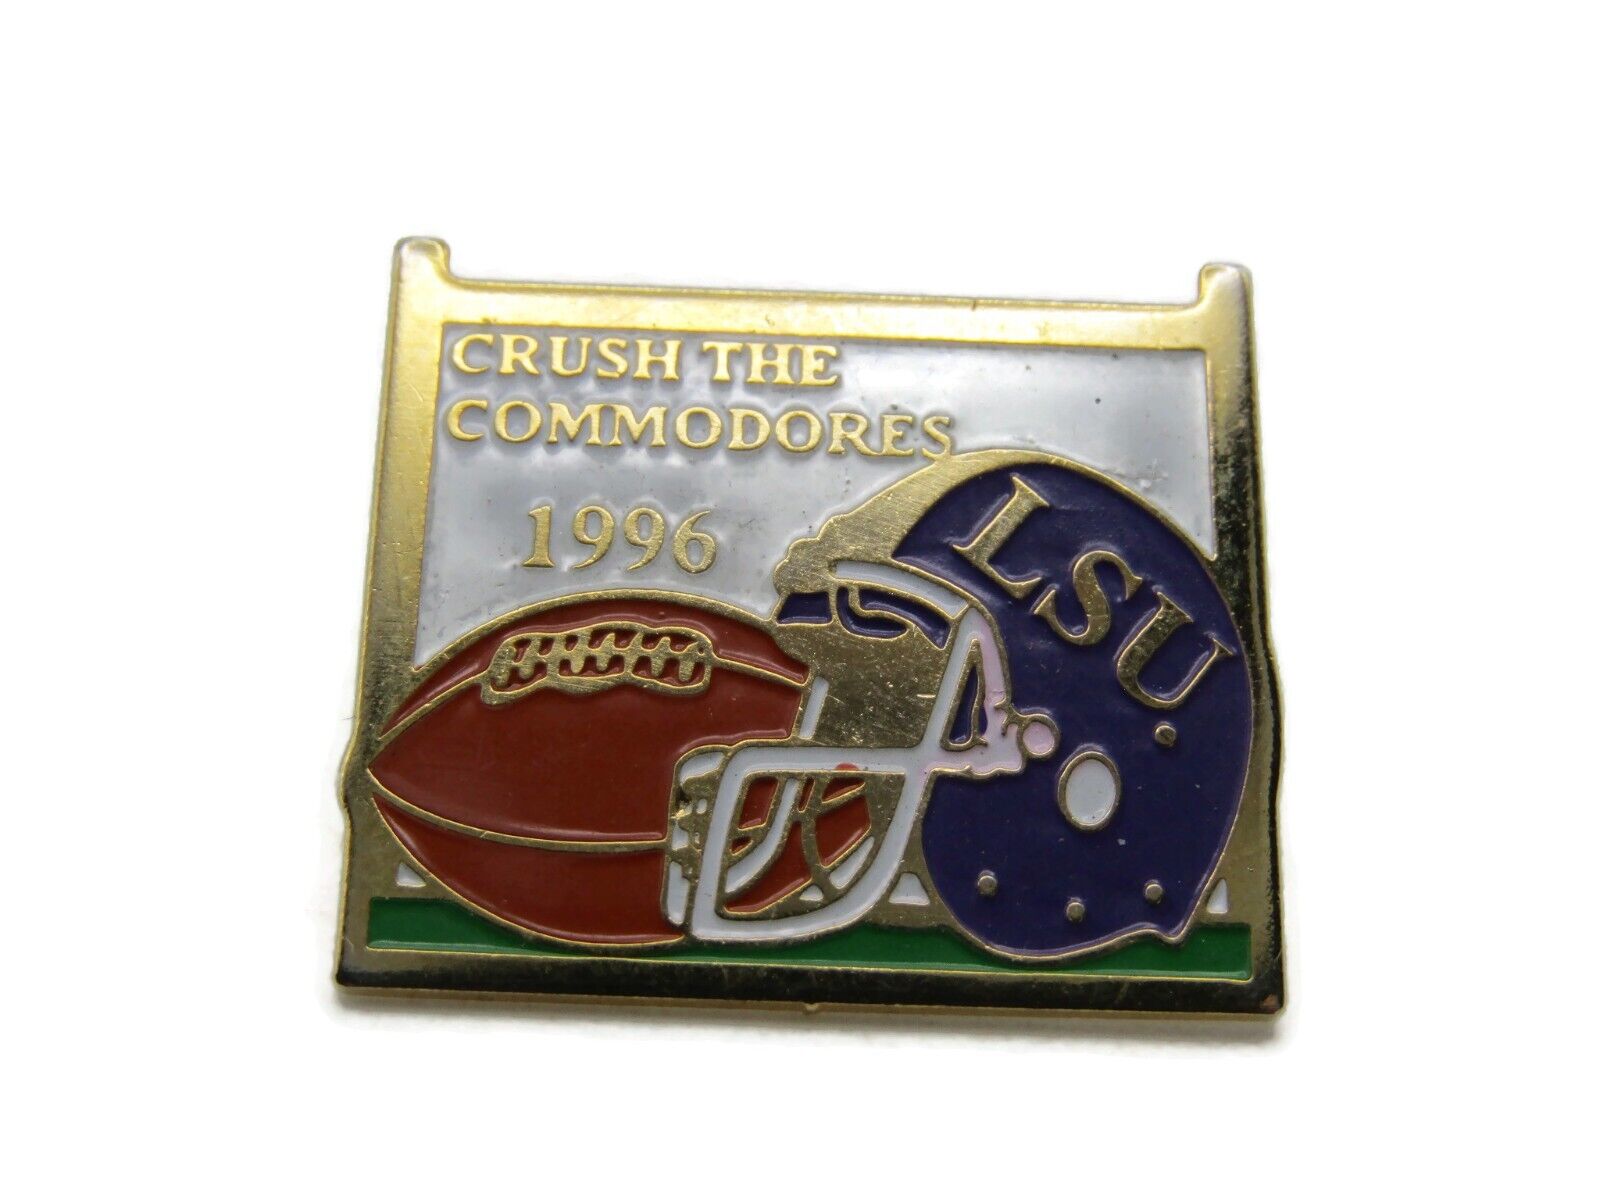 LSU 1996 Crush The Commodores Football Pin Gold Tone